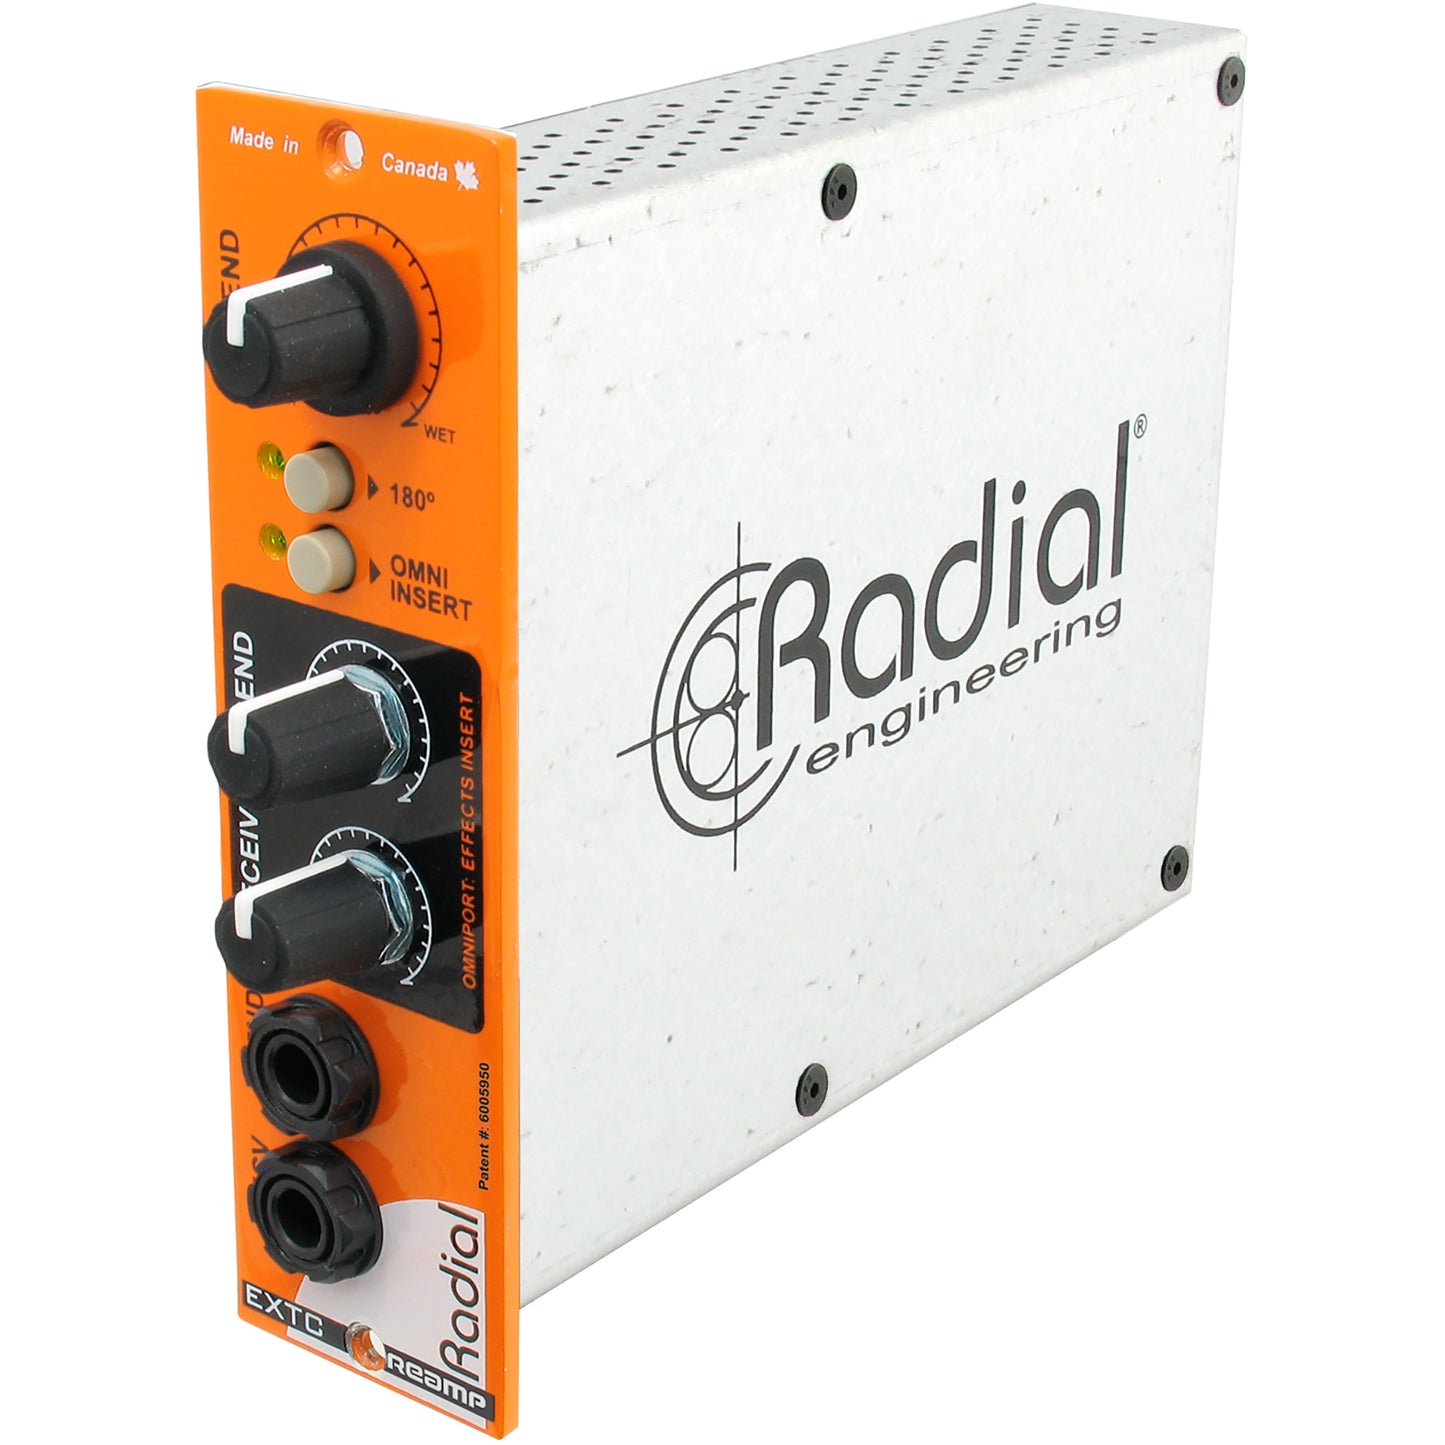 Radial EXTC 500-Series Guitar Effects Interface